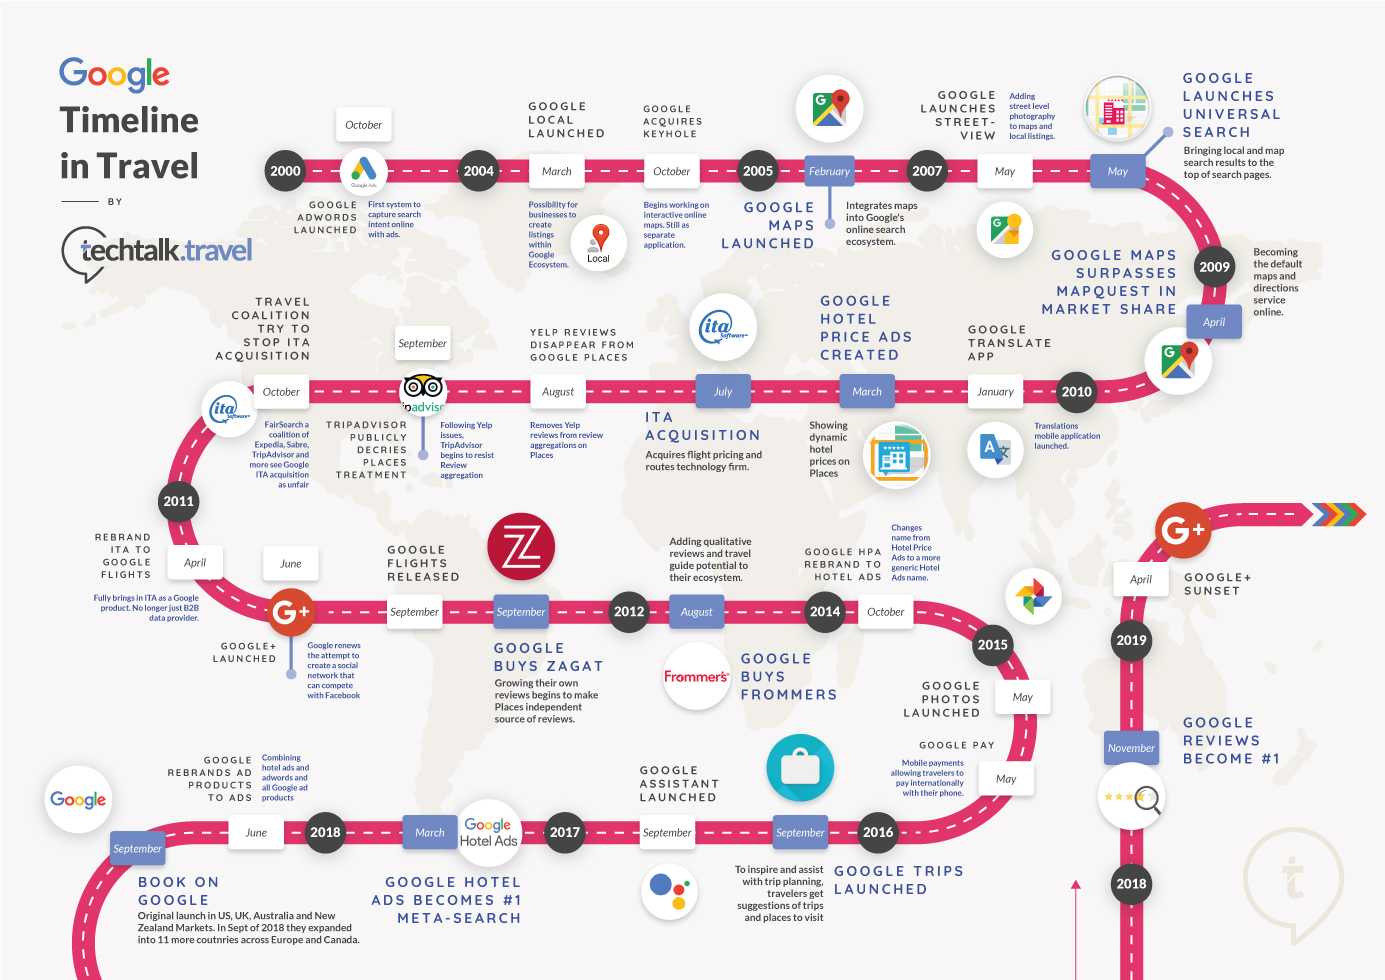 Google's Influence on Travel | Infographic